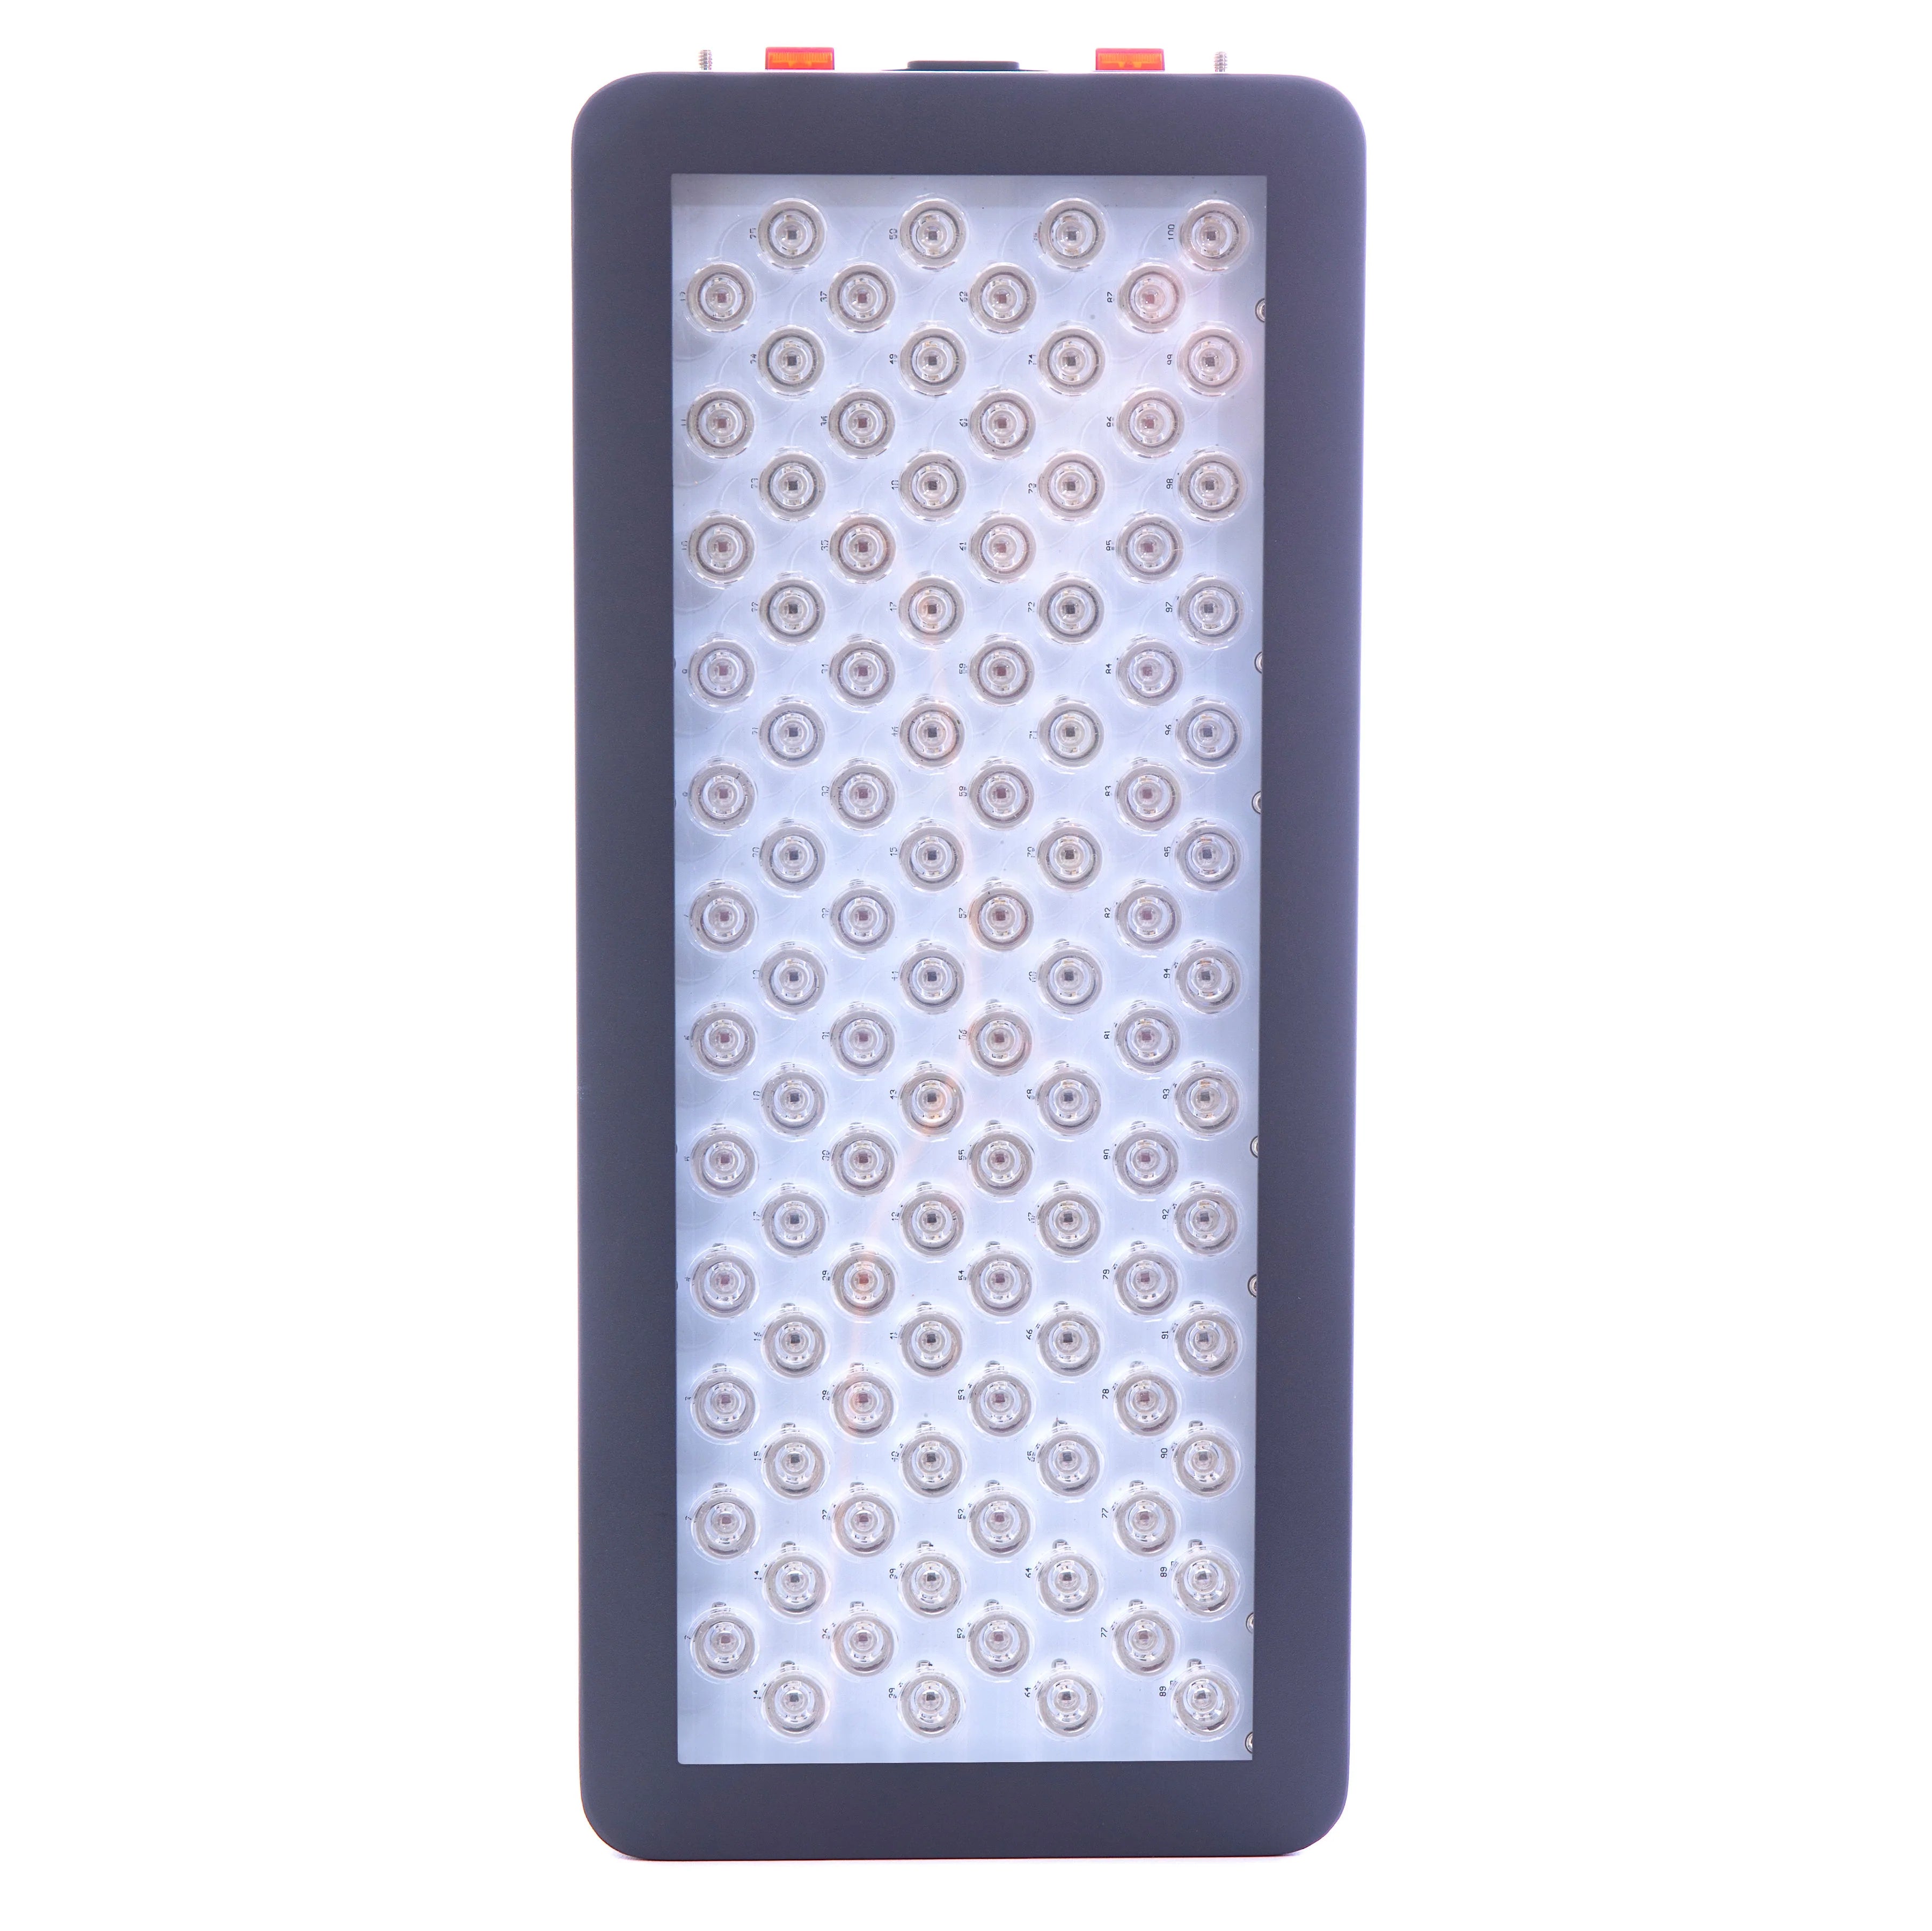 Hooga HG500 - Red Light Therapy Device